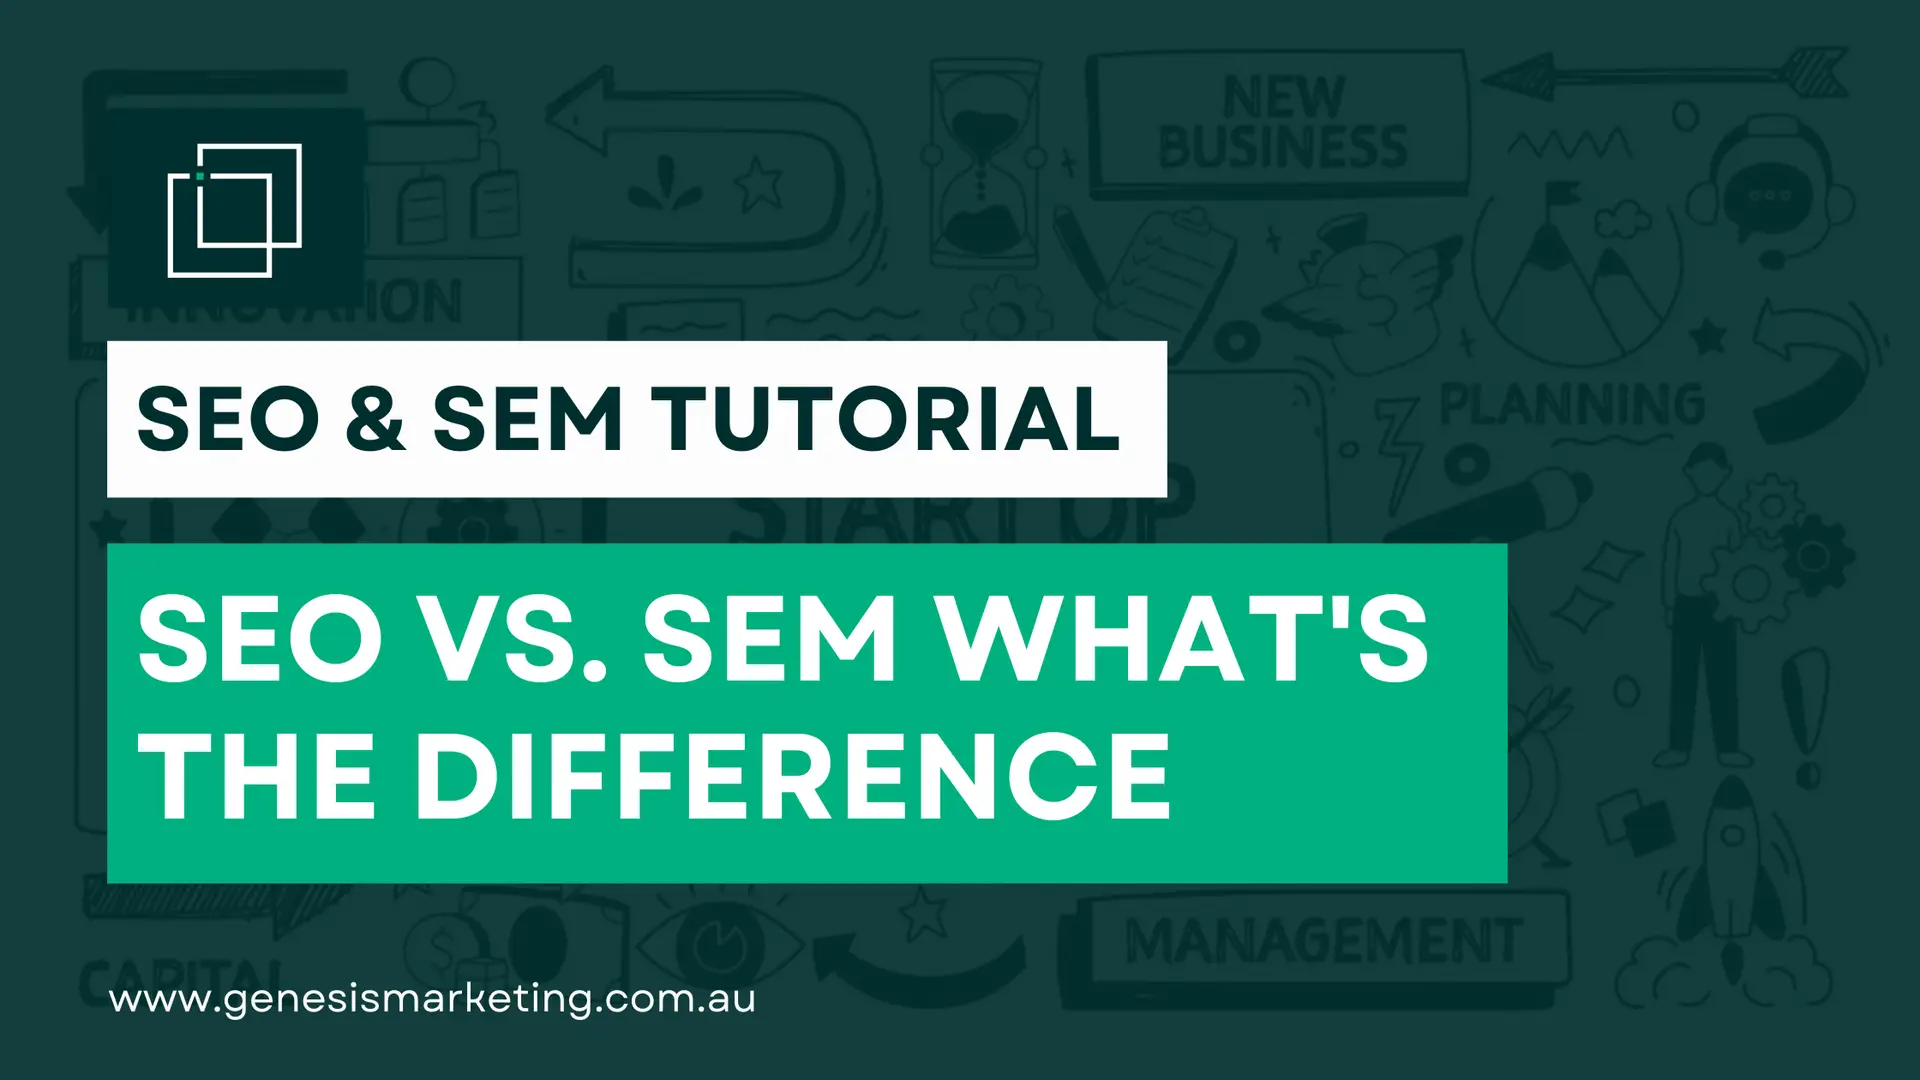 SEO vs. SEM What's the Difference